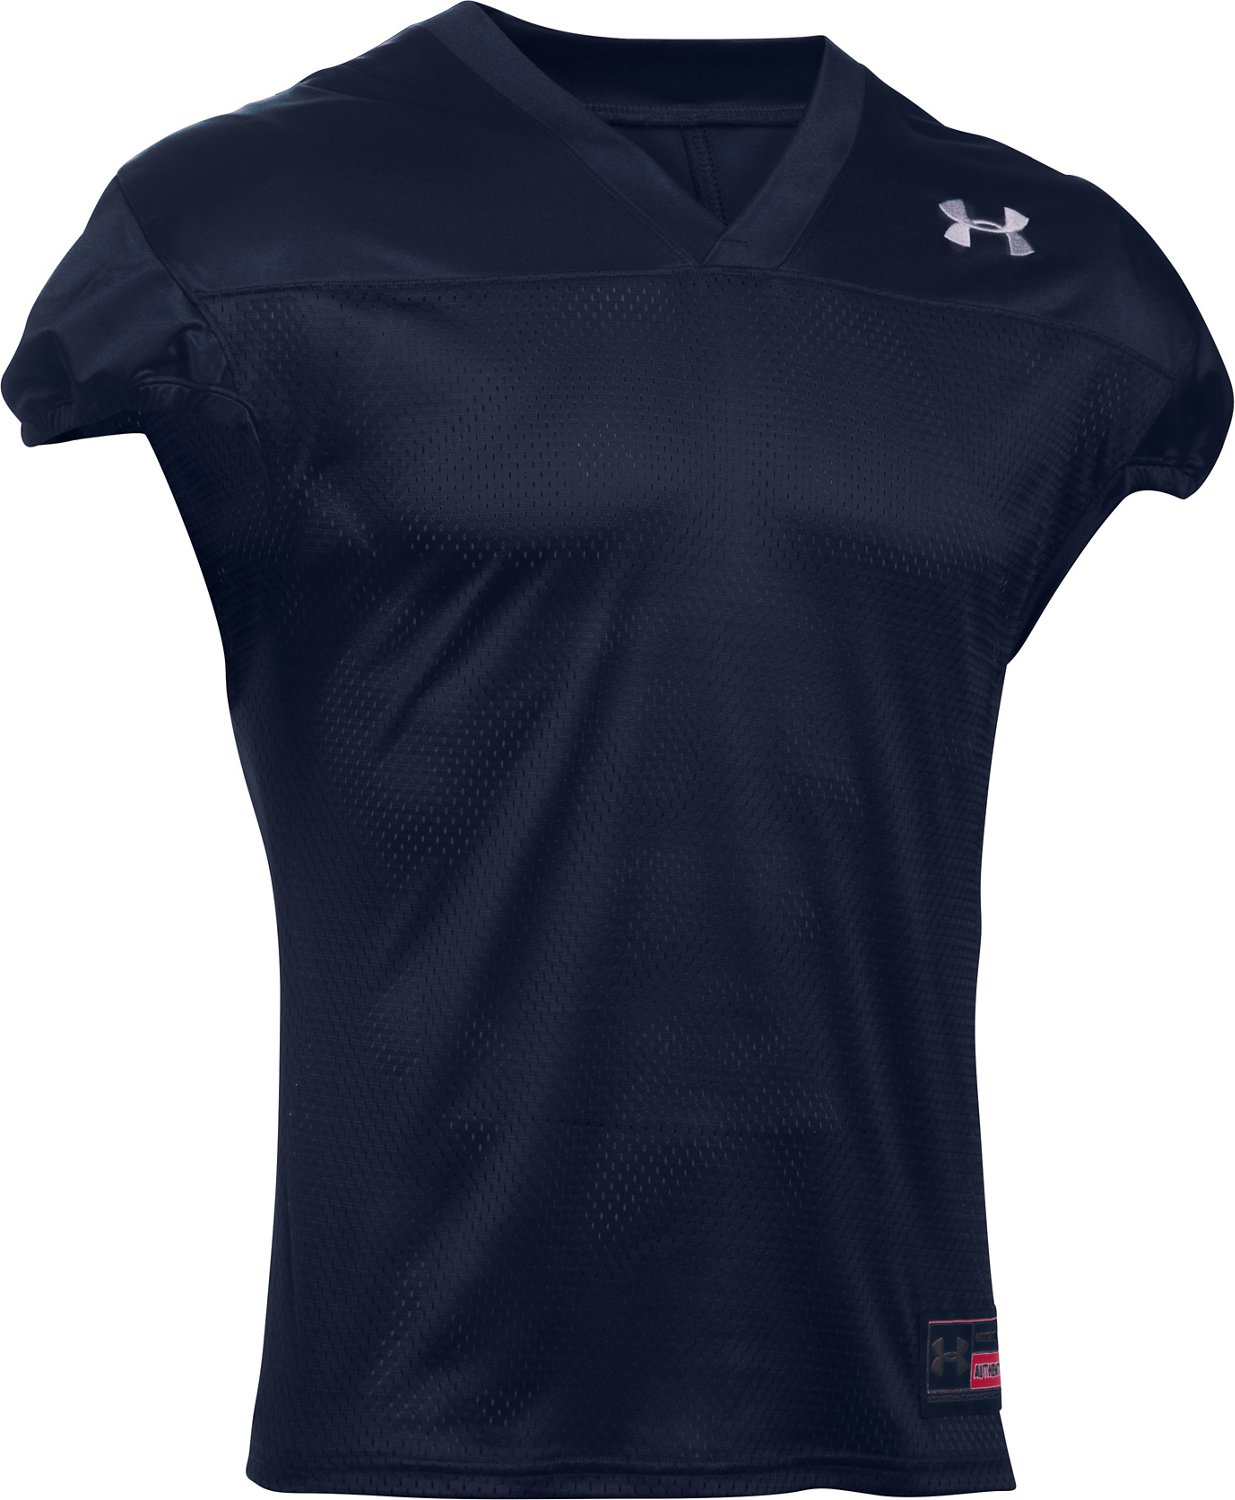 under armour practice jersey basketball